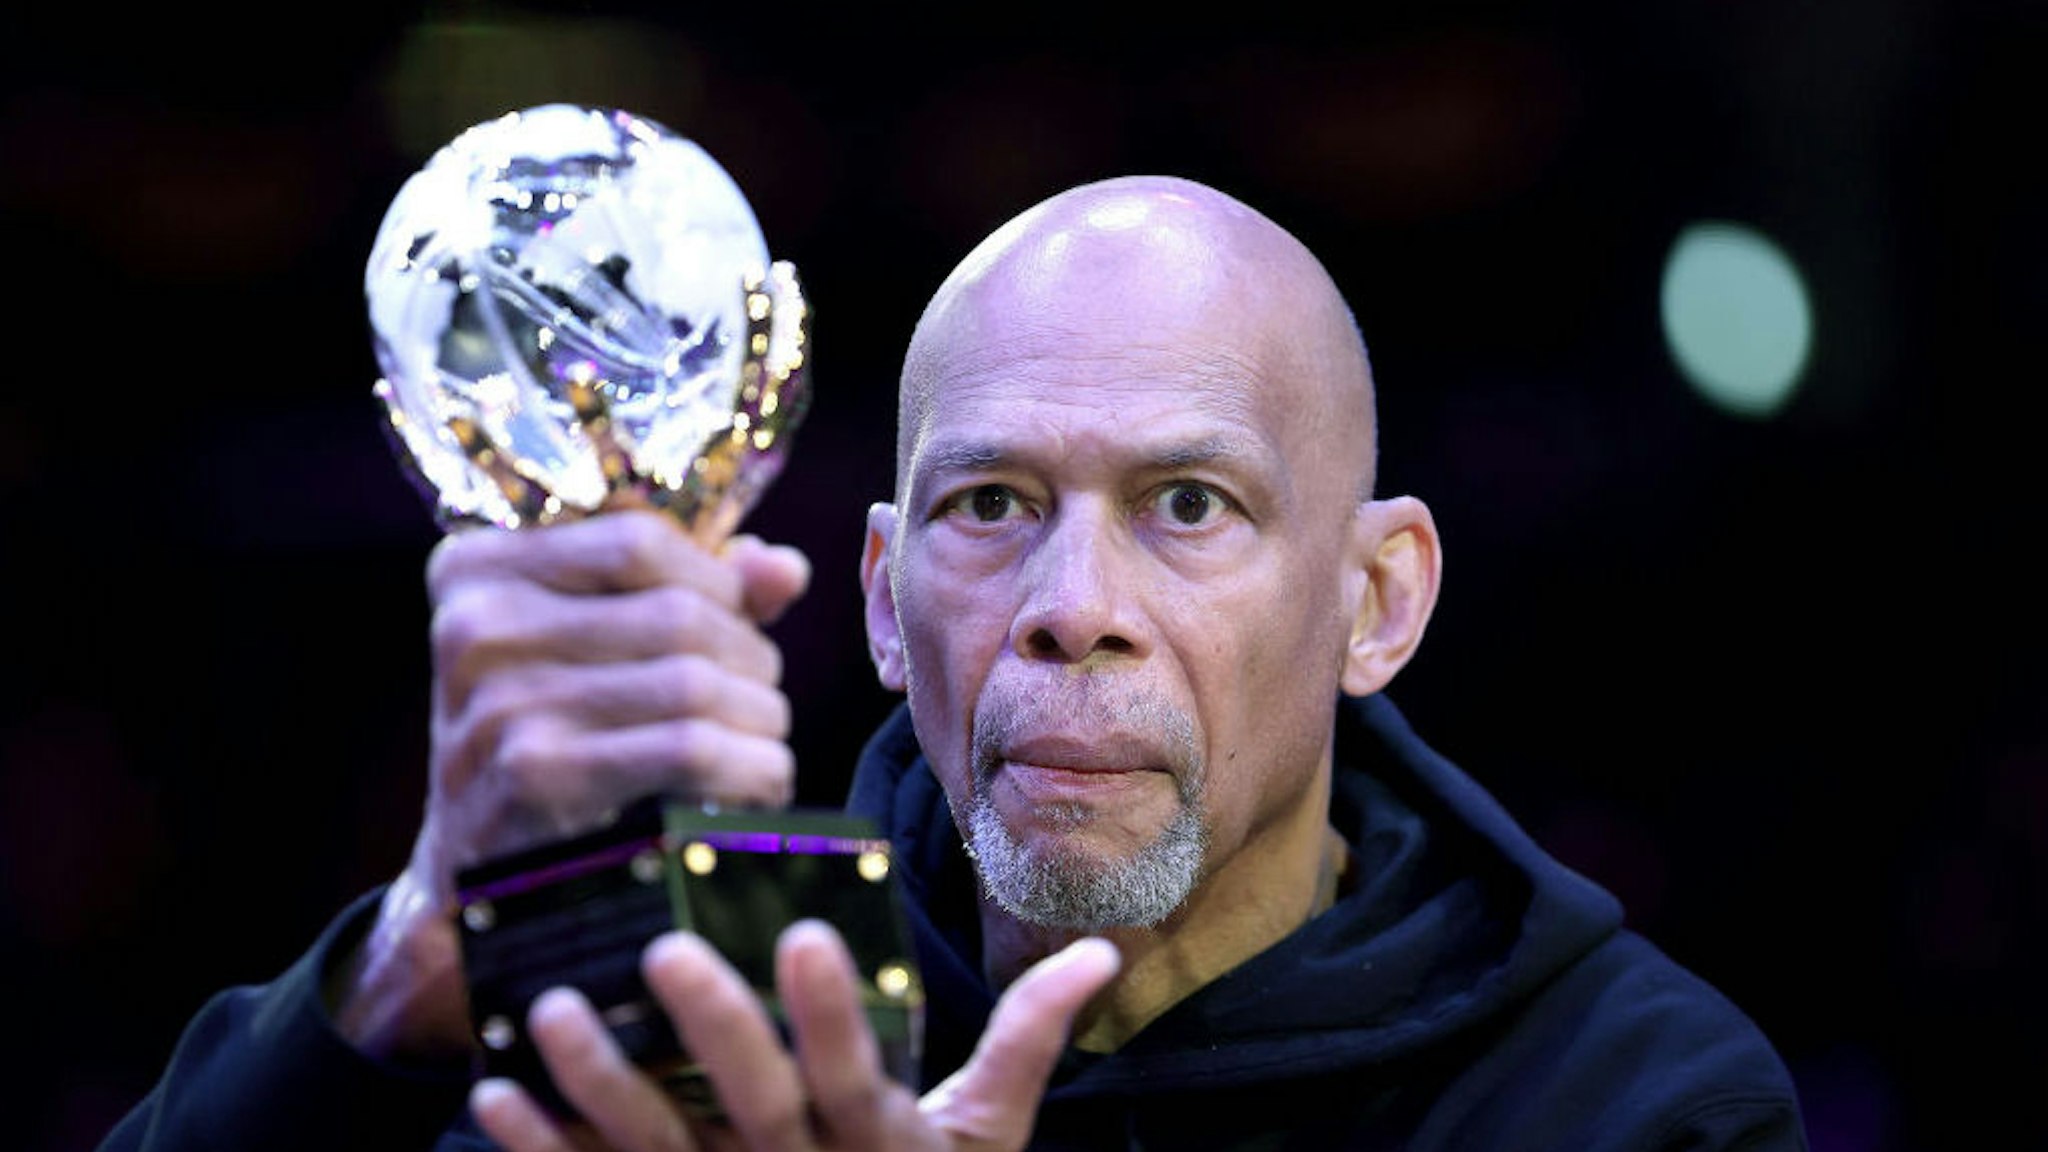 LOS ANGELES, CALIFORNIA - APRIL 03: Retired basketball player Kareem Abdul-Jabbar holds the trophy for the league’s annual Social Justice Champion award prior to a game between the Los Angeles Lakers and the Denver Nuggets at Crypto.com Arena on April 03, 2022 in Los Angeles, California. NOTE TO USER: User expressly acknowledges and agrees that, by downloading and/or using this Photograph, user is consenting to the terms and conditions of the Getty Images License Agreement. Mandatory Copyright Notice: Copyright 2022 NBAE (Photo by Sean M. Haffey/Getty Images)